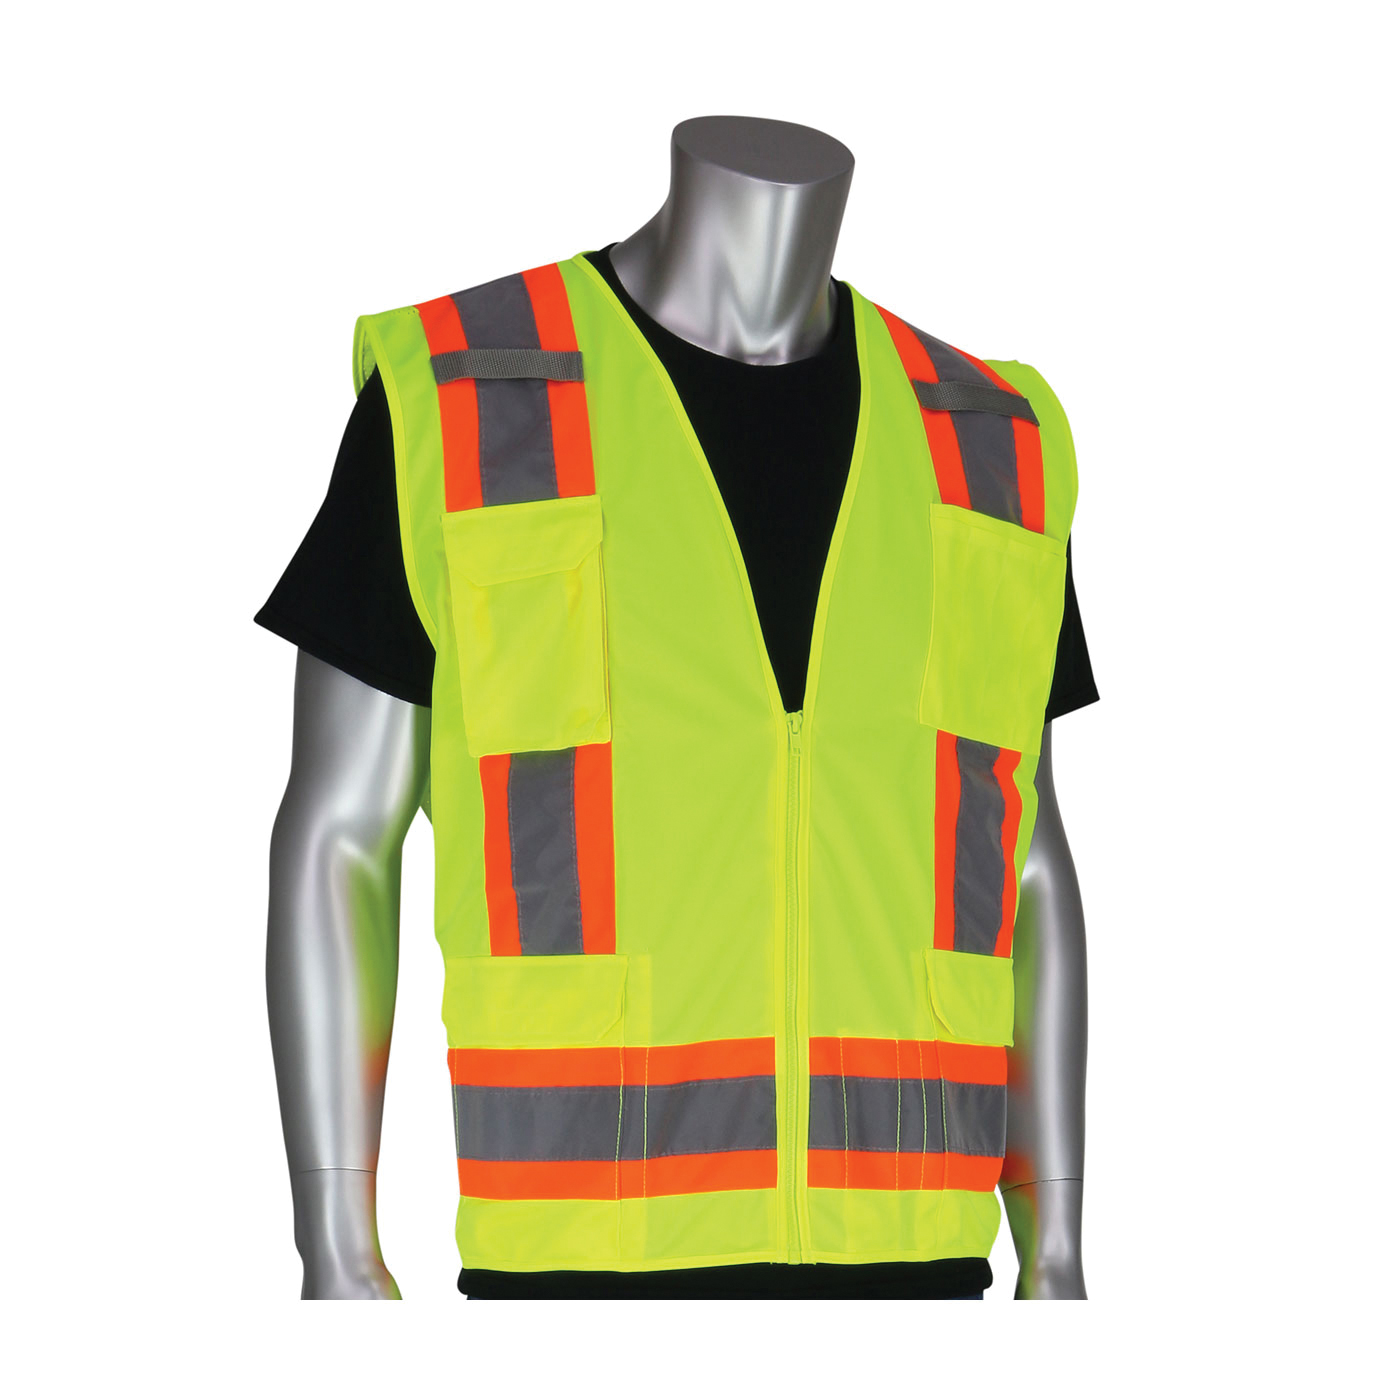 PIP® 302-0500-YEL/7X 2-Tone Surveyor Safety Vest, 7XL, Hi-Viz Lime Yellow, Polyester/Solid Tricot, Zipper Closure, 11 Pockets, ANSI Class: Class 2, Specifications Met: ANSI 107 Type R